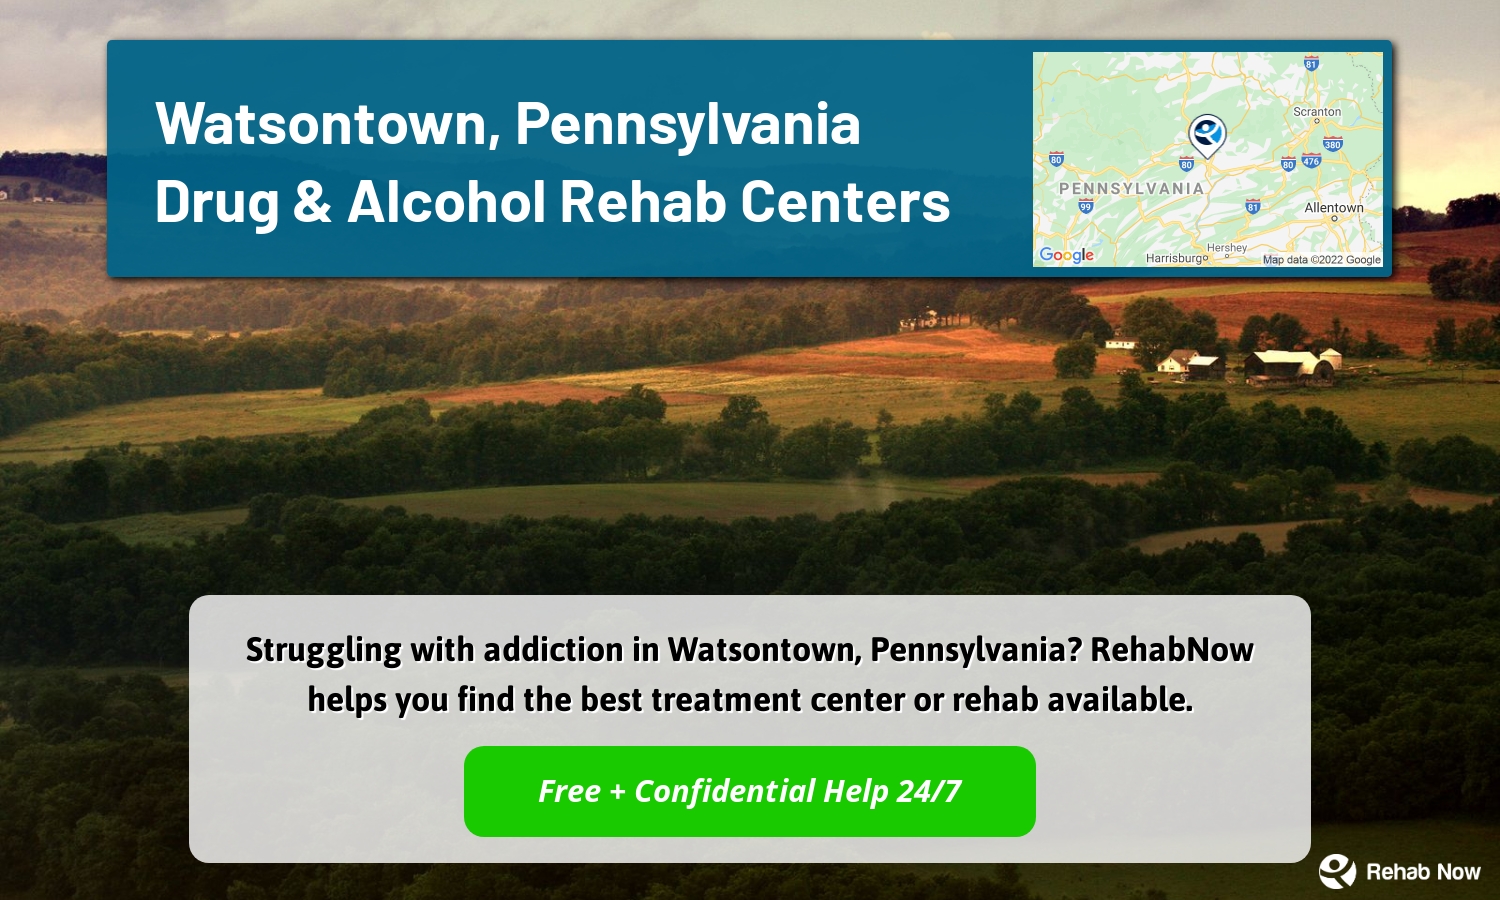 Struggling with addiction in Watsontown, Pennsylvania? RehabNow helps you find the best treatment center or rehab available.